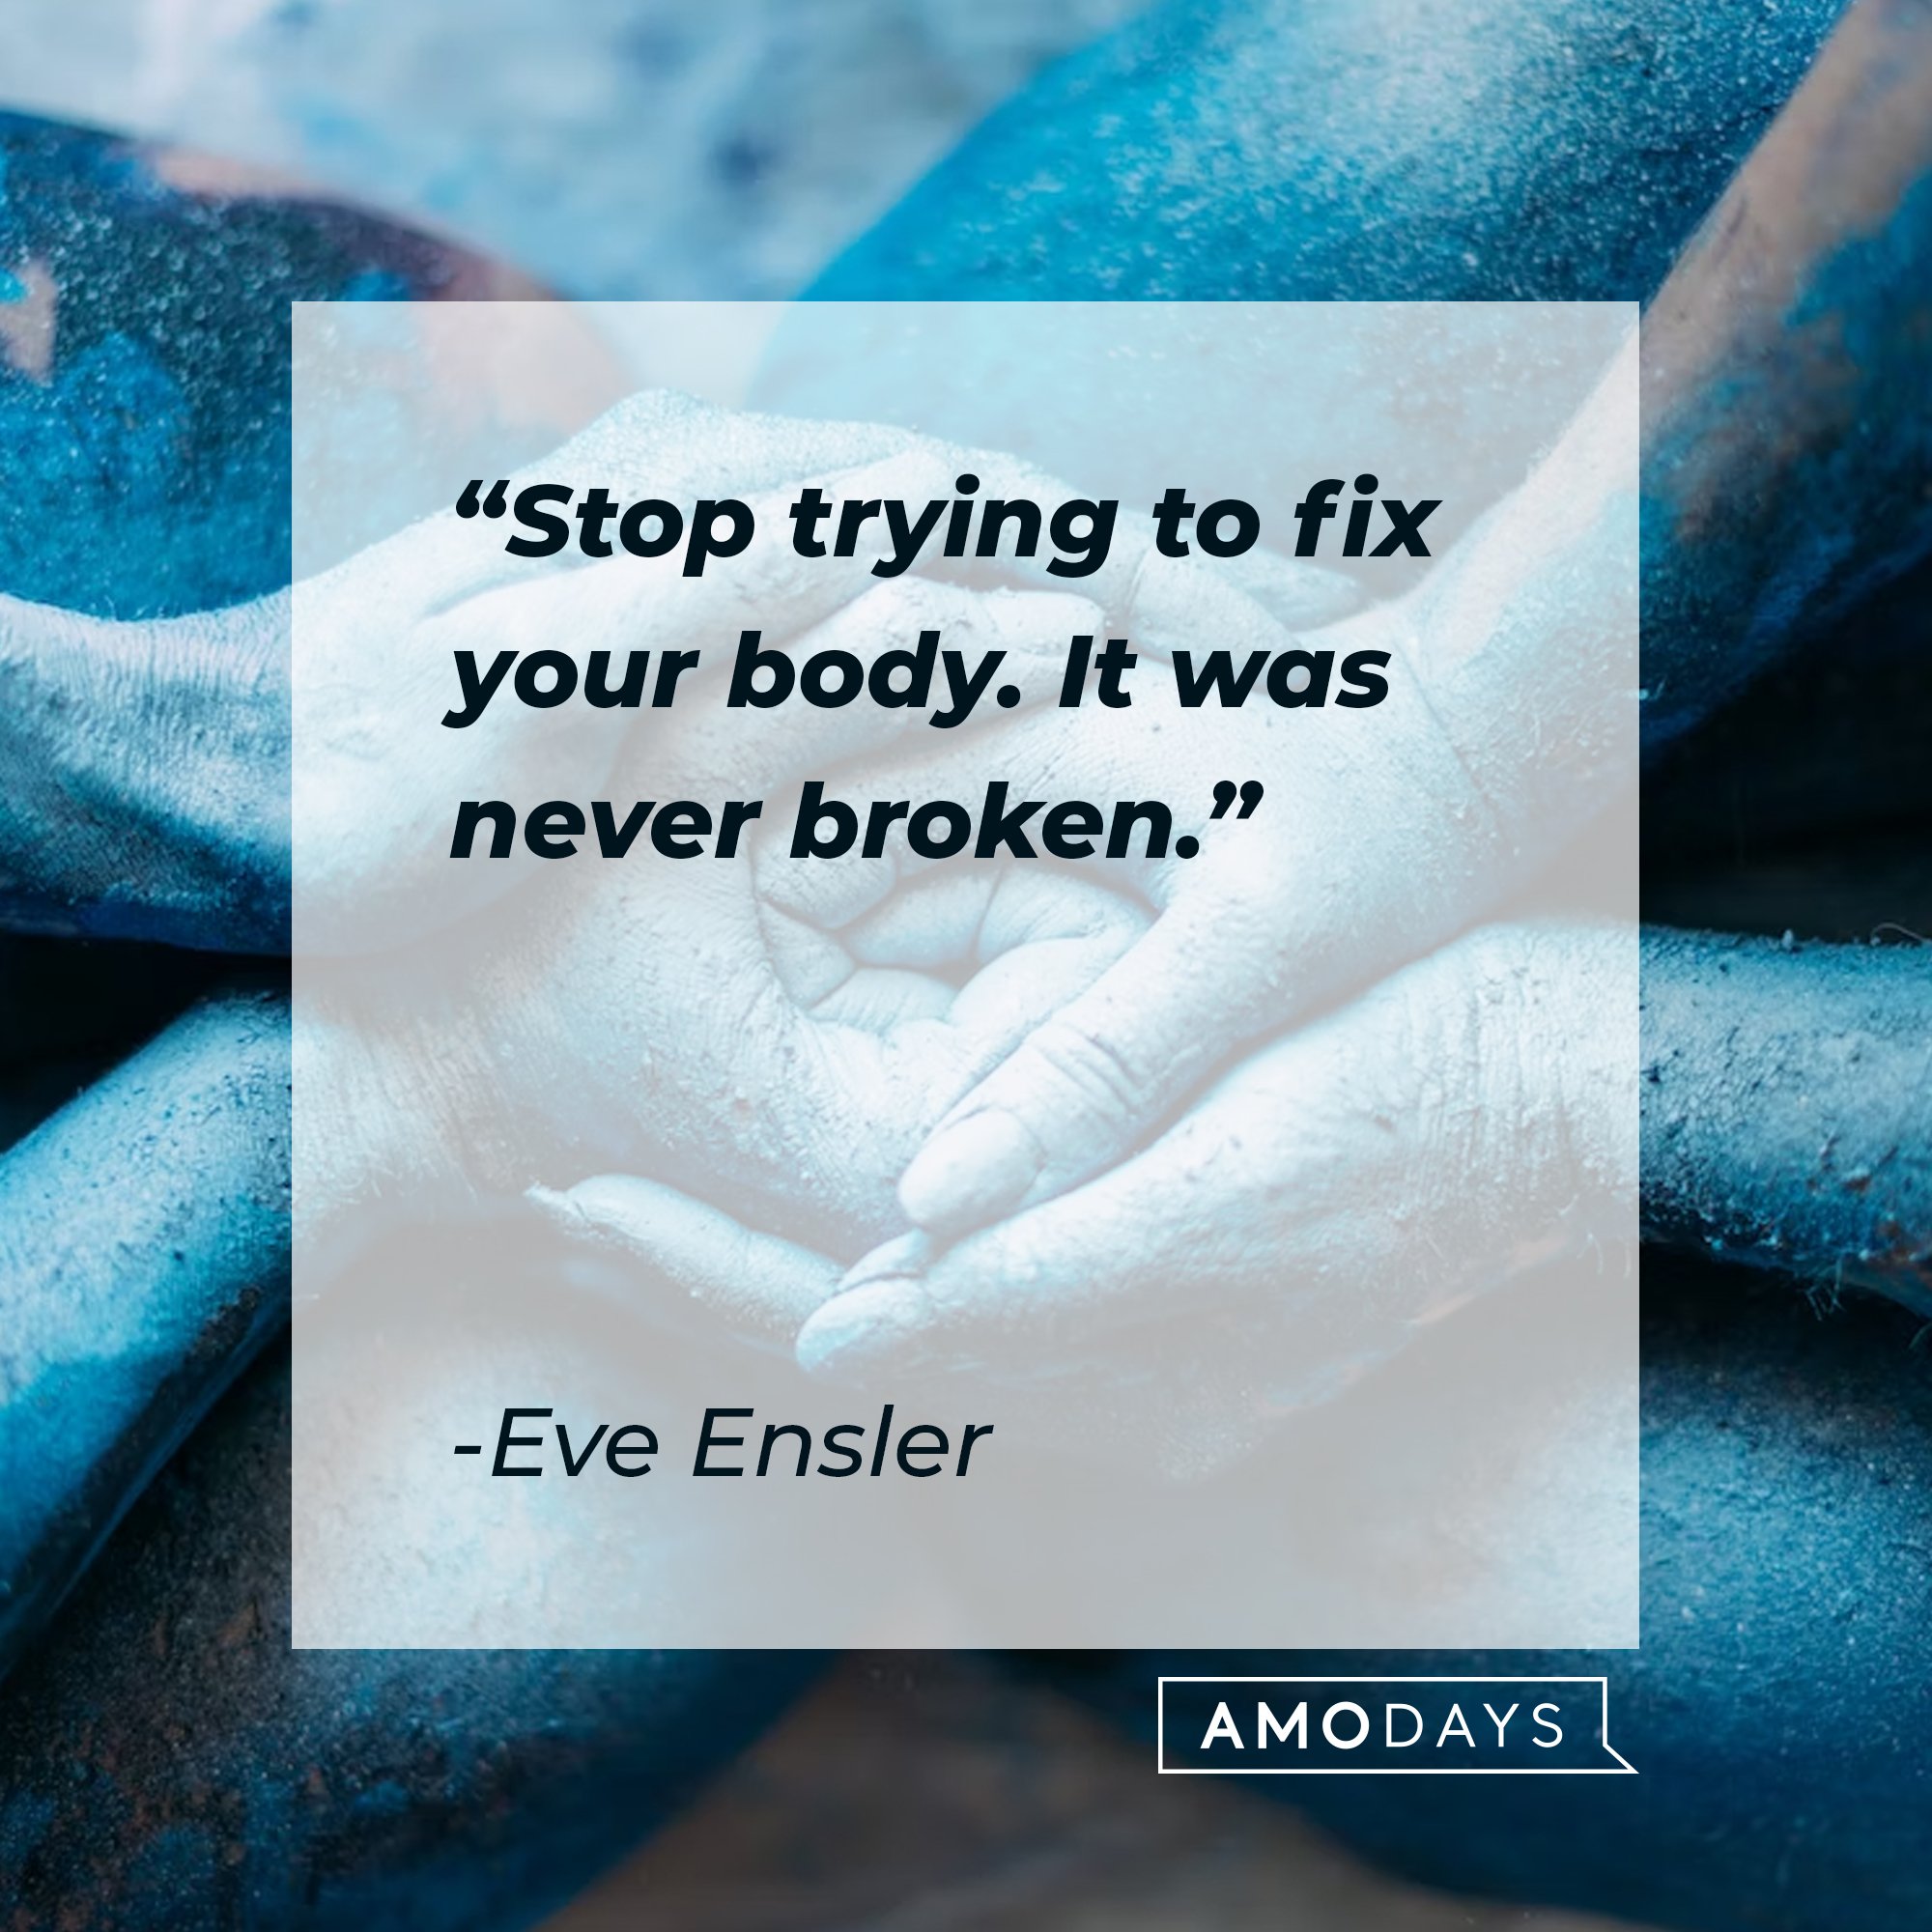  Eve Ensler’s quote: "Stop trying to fix your body. It was never broken." | Image: AmoDays